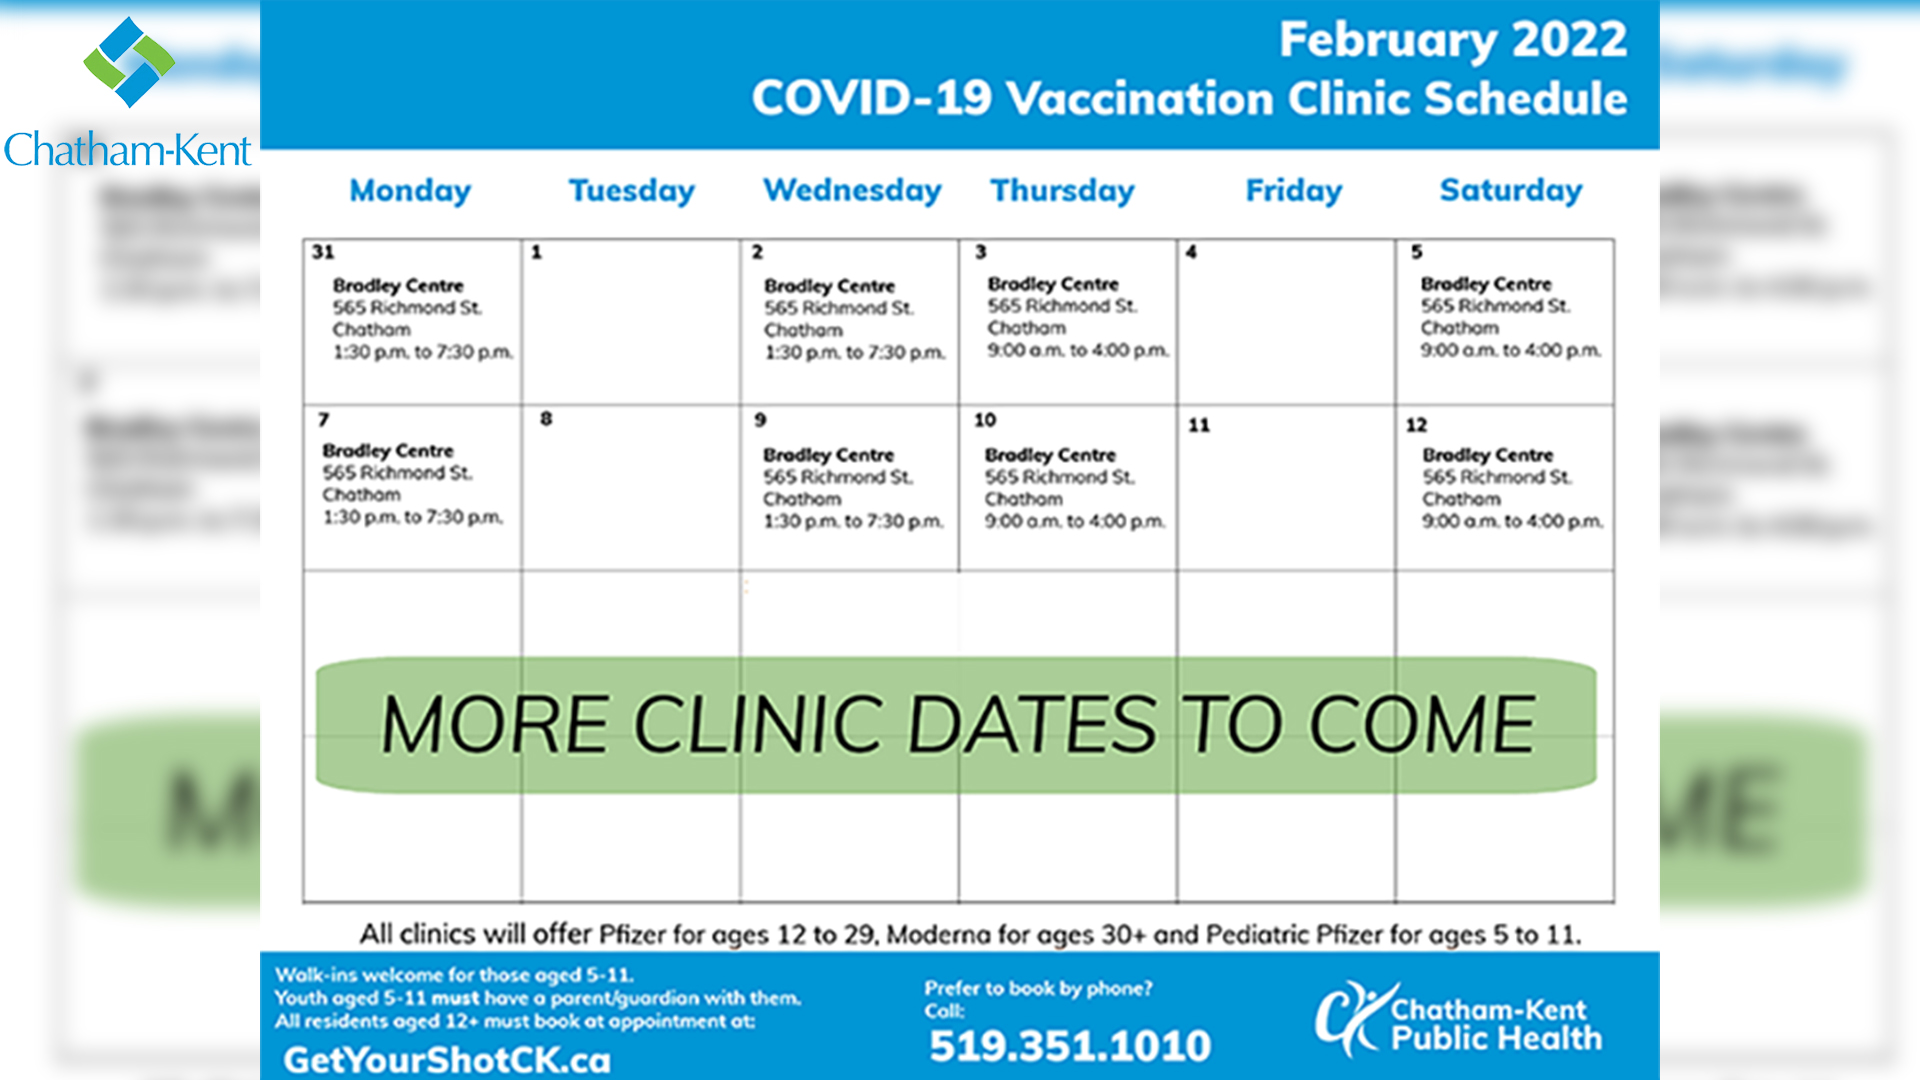 Important Information from CK Public Health Regarding COVID-19 Vaccination Clinics for 5 to 11 Year Olds